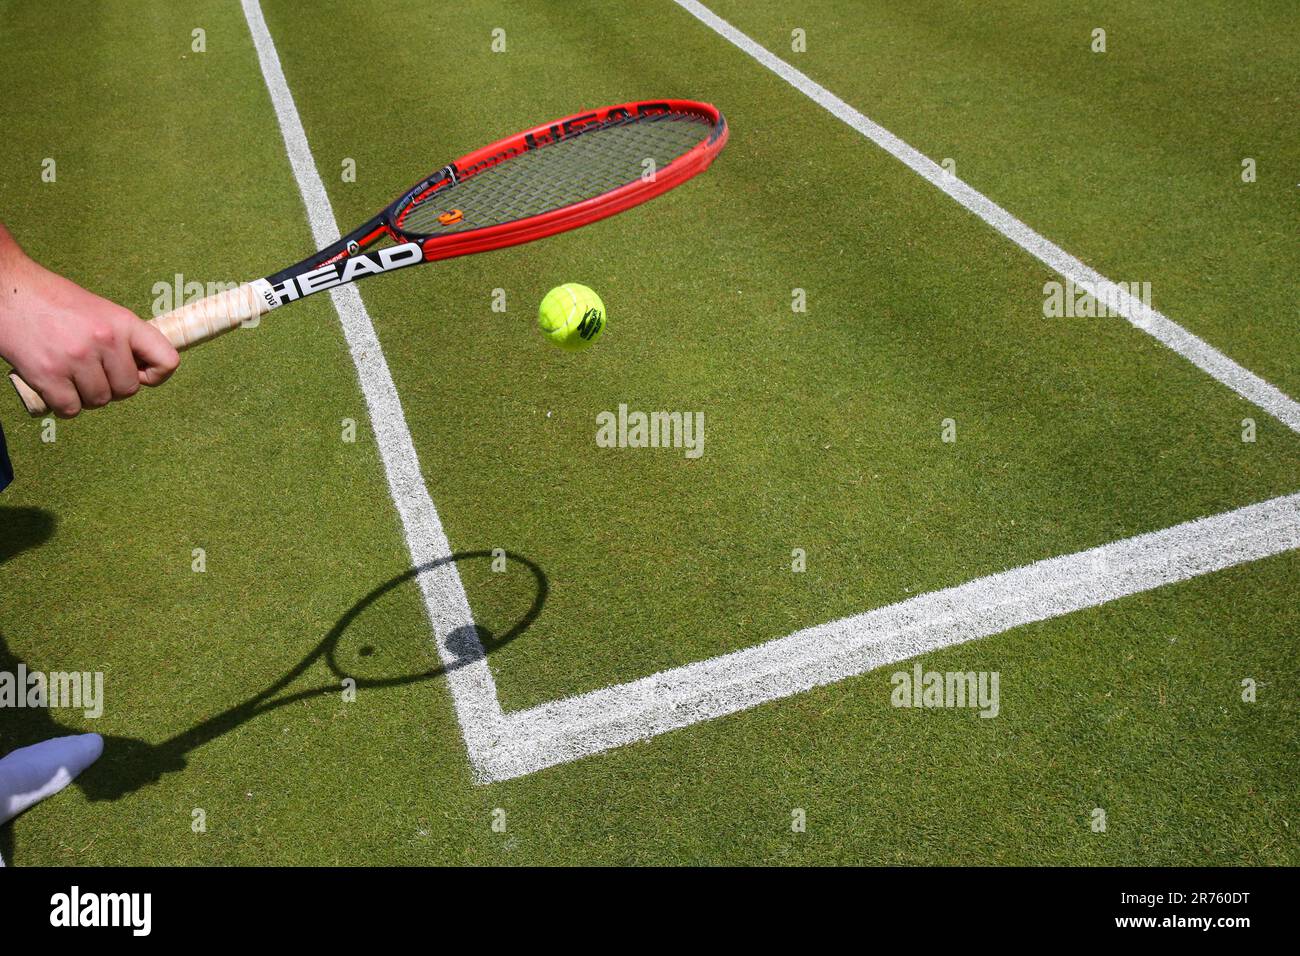 Berlin, Germany. 13th June, 2023. Tennis: Press briefing on WTA tournament:  On socks, a groundskeeper tests the grass quality of the center court  before the bett1 OPEN WTA tournament at the clubhouse